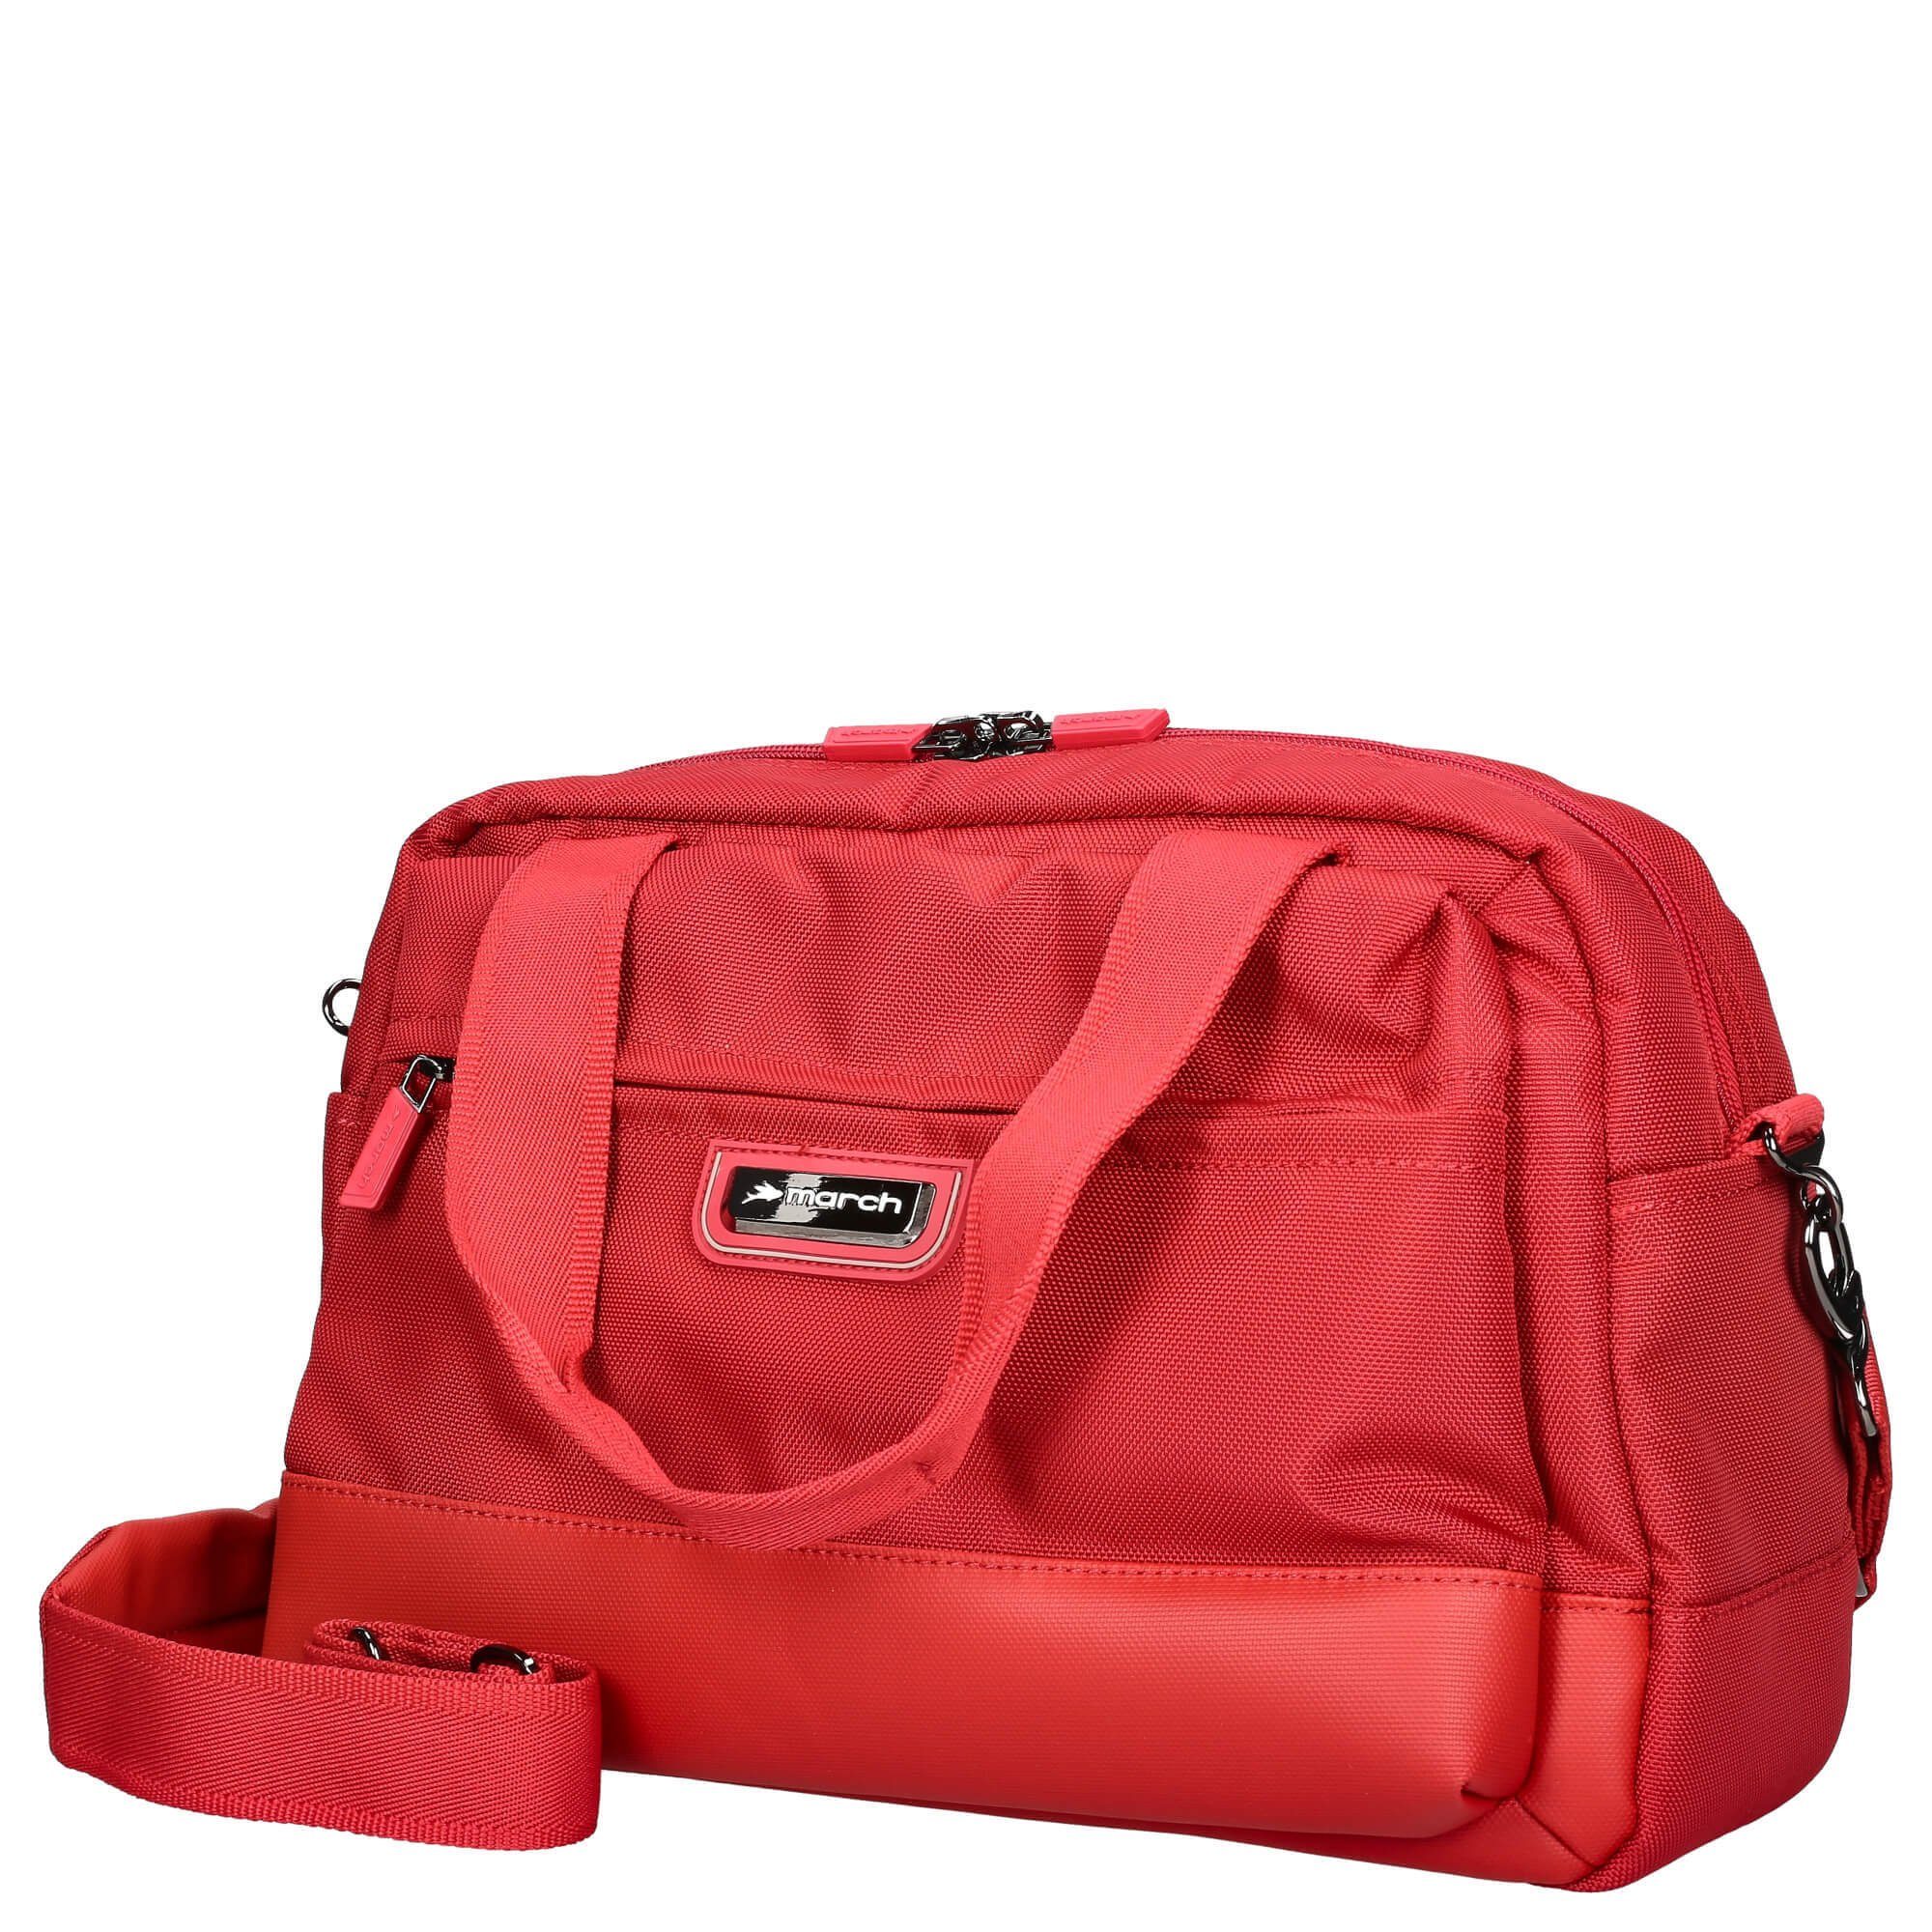 stow a´way Trading Businesstasche red Rolling Umhängetasche cm 38 March15 - Bags